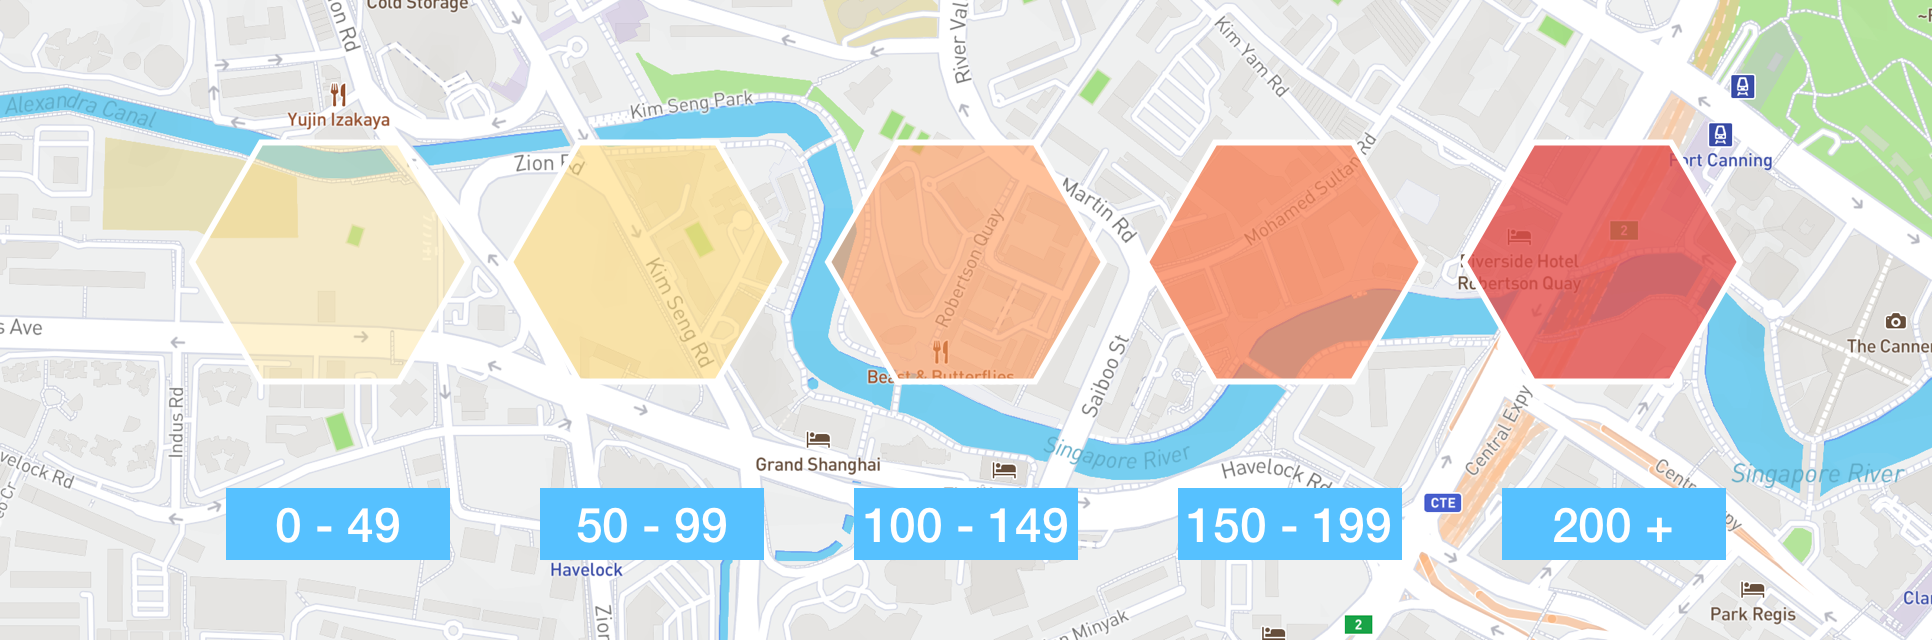 A react slider example that is used to build a taxi demand heat map